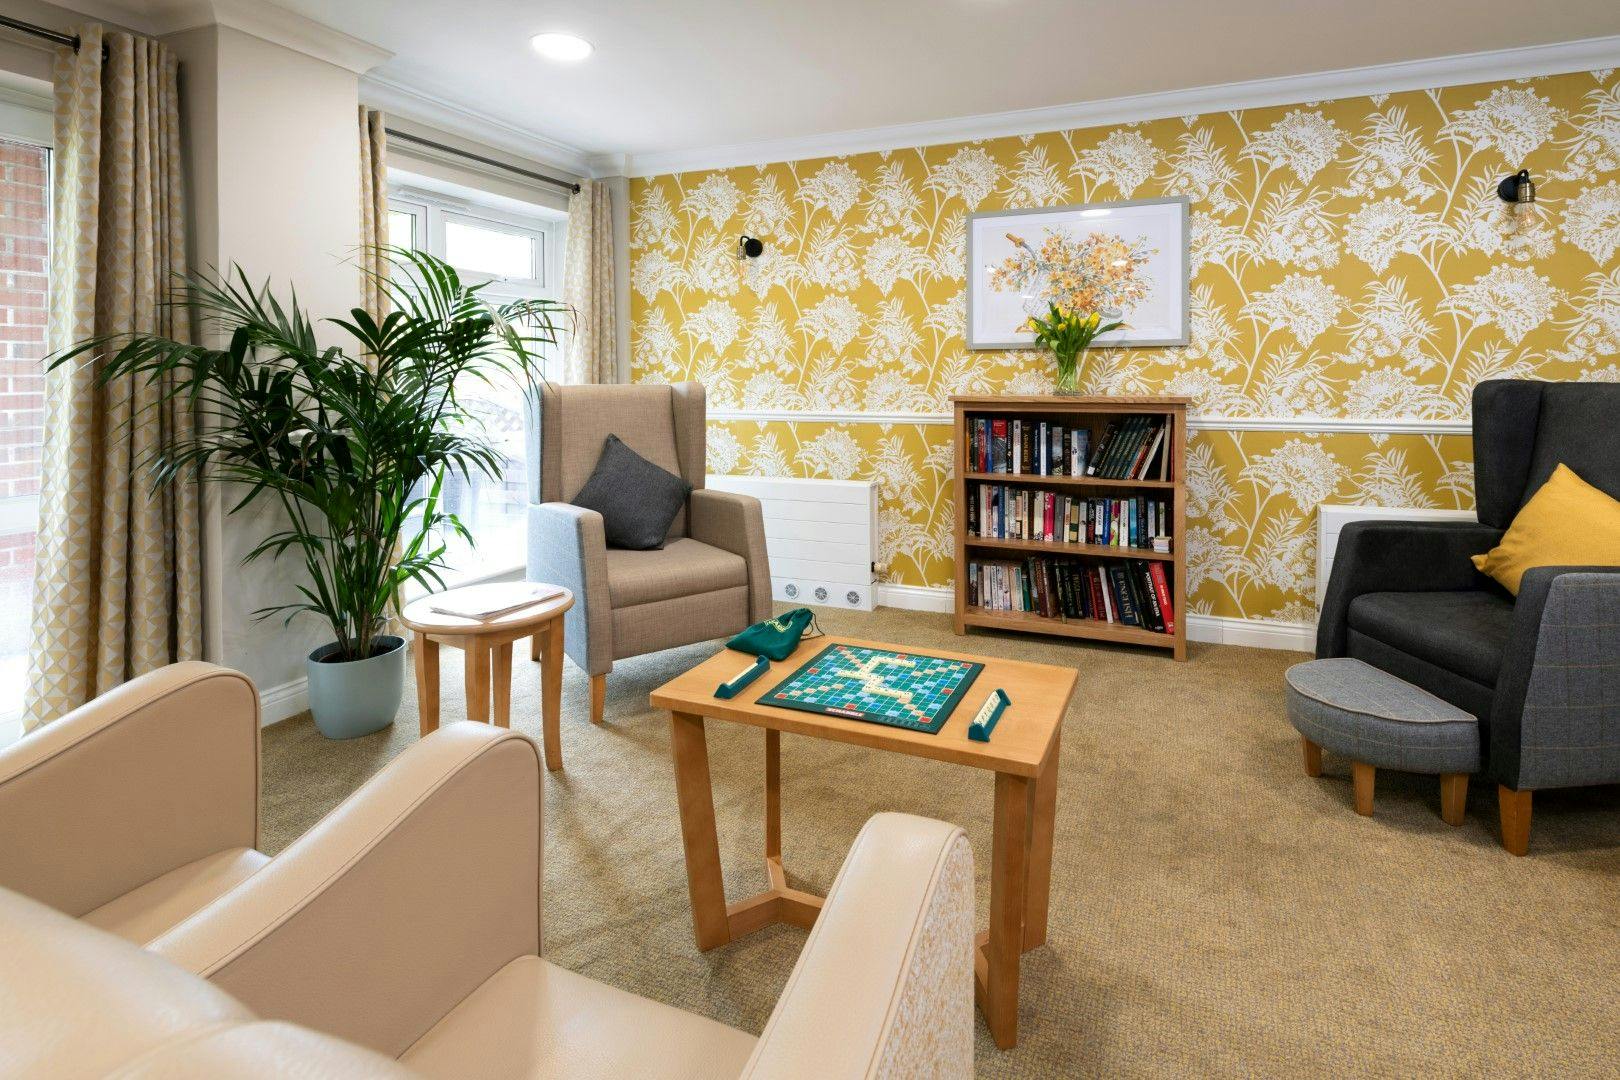 Communal Area at Ty Enfys Care Home in Cardiff, South Glamorgan